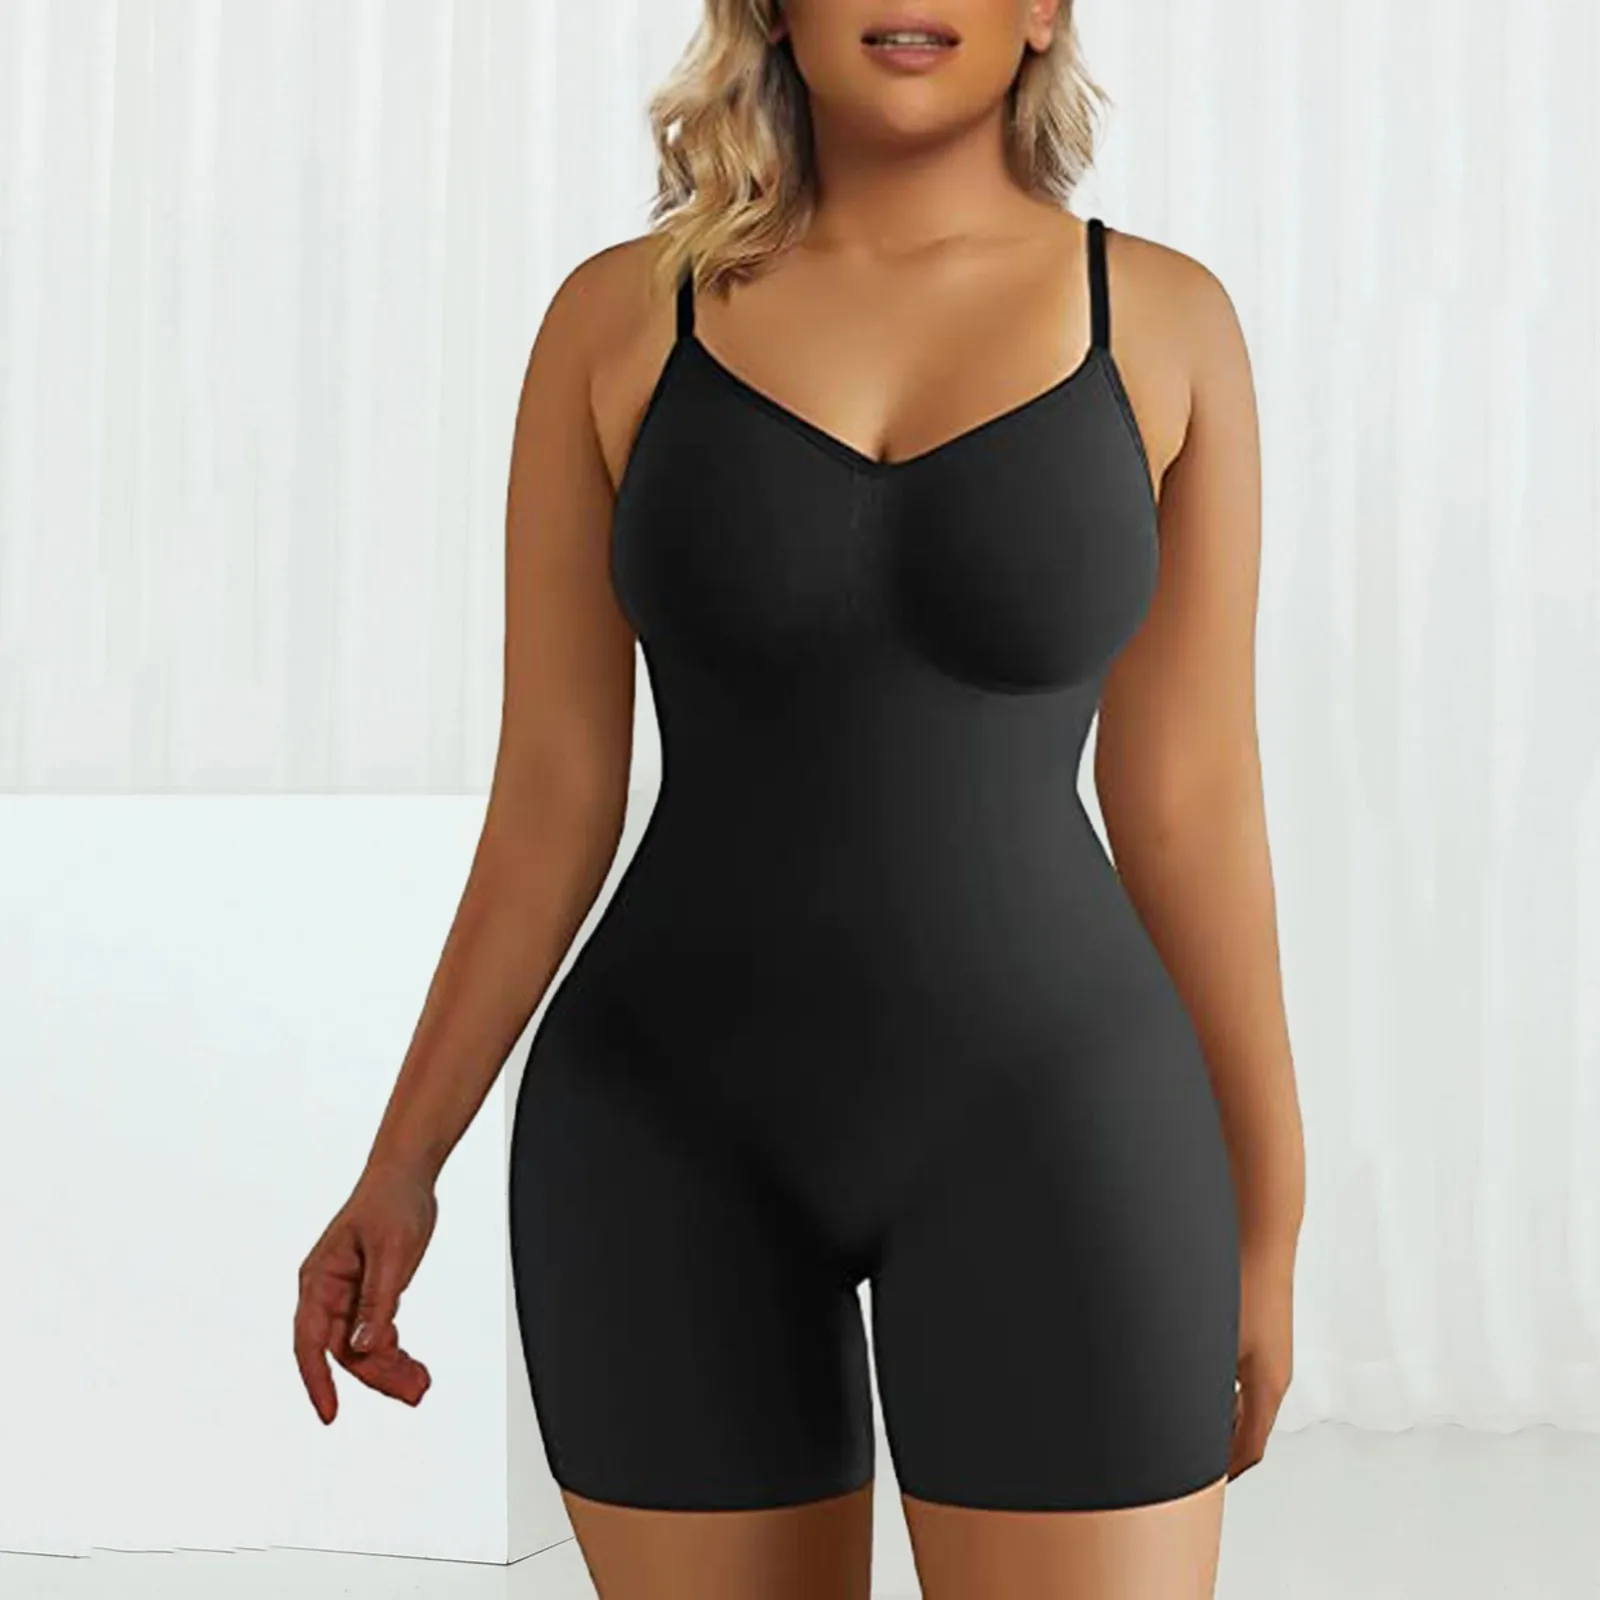 Ladies Enhanced Version Of U Shaped Body Shaping Corset Compression Seamless Support Vest Female Postpartum Body Shaping